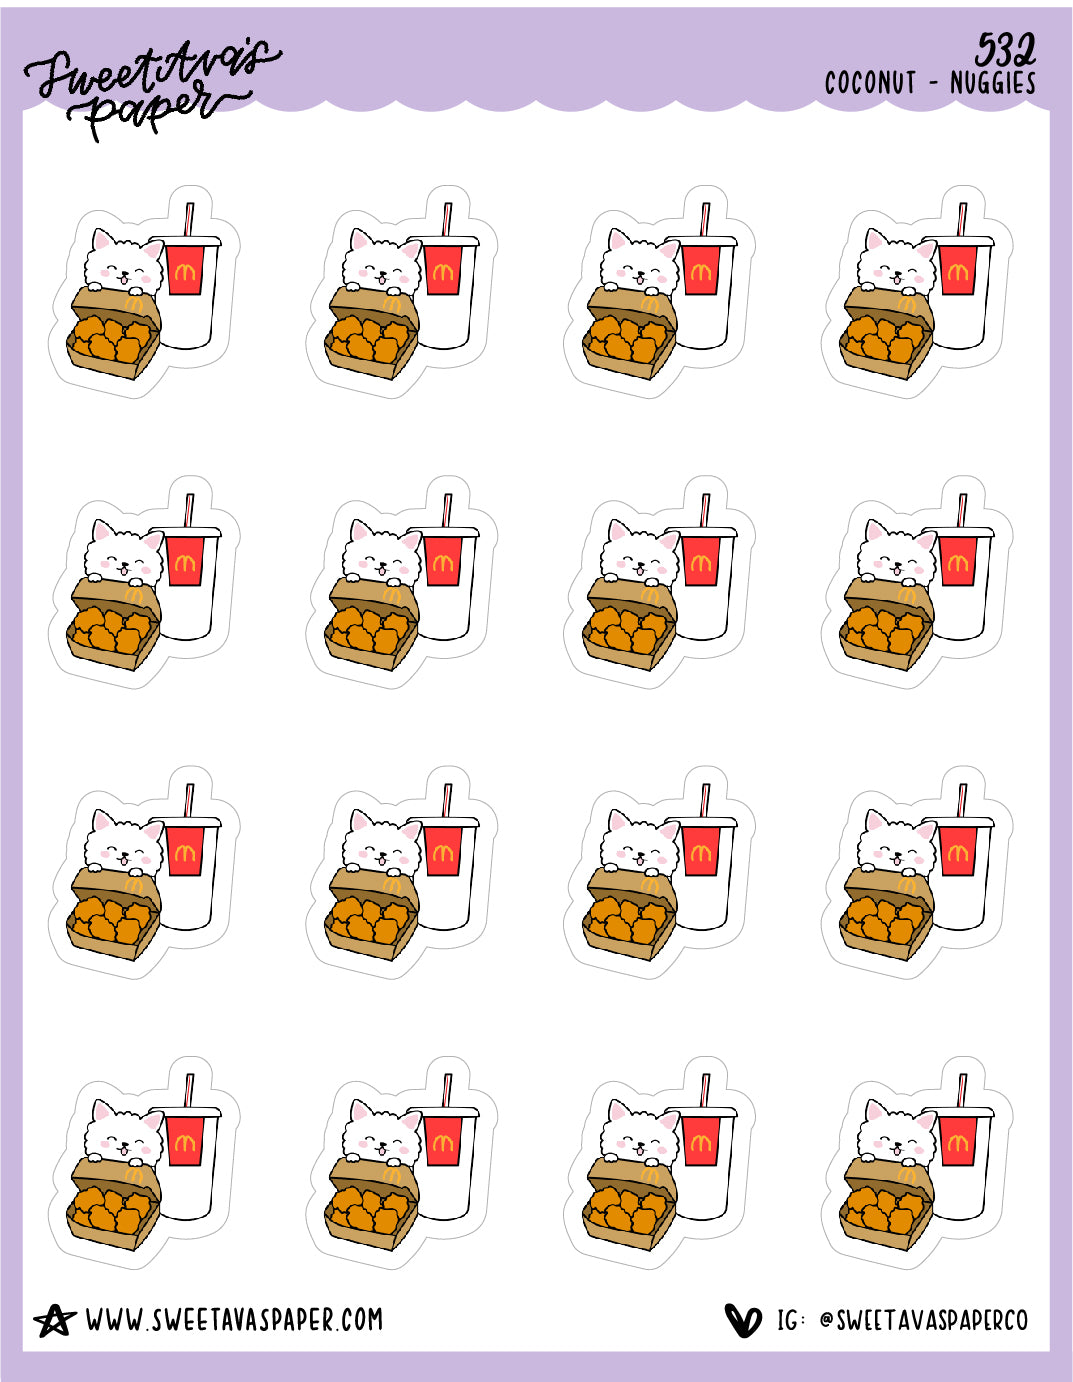 Chicken Nuggets Planner Stickers - Coconut the Puppy [532]